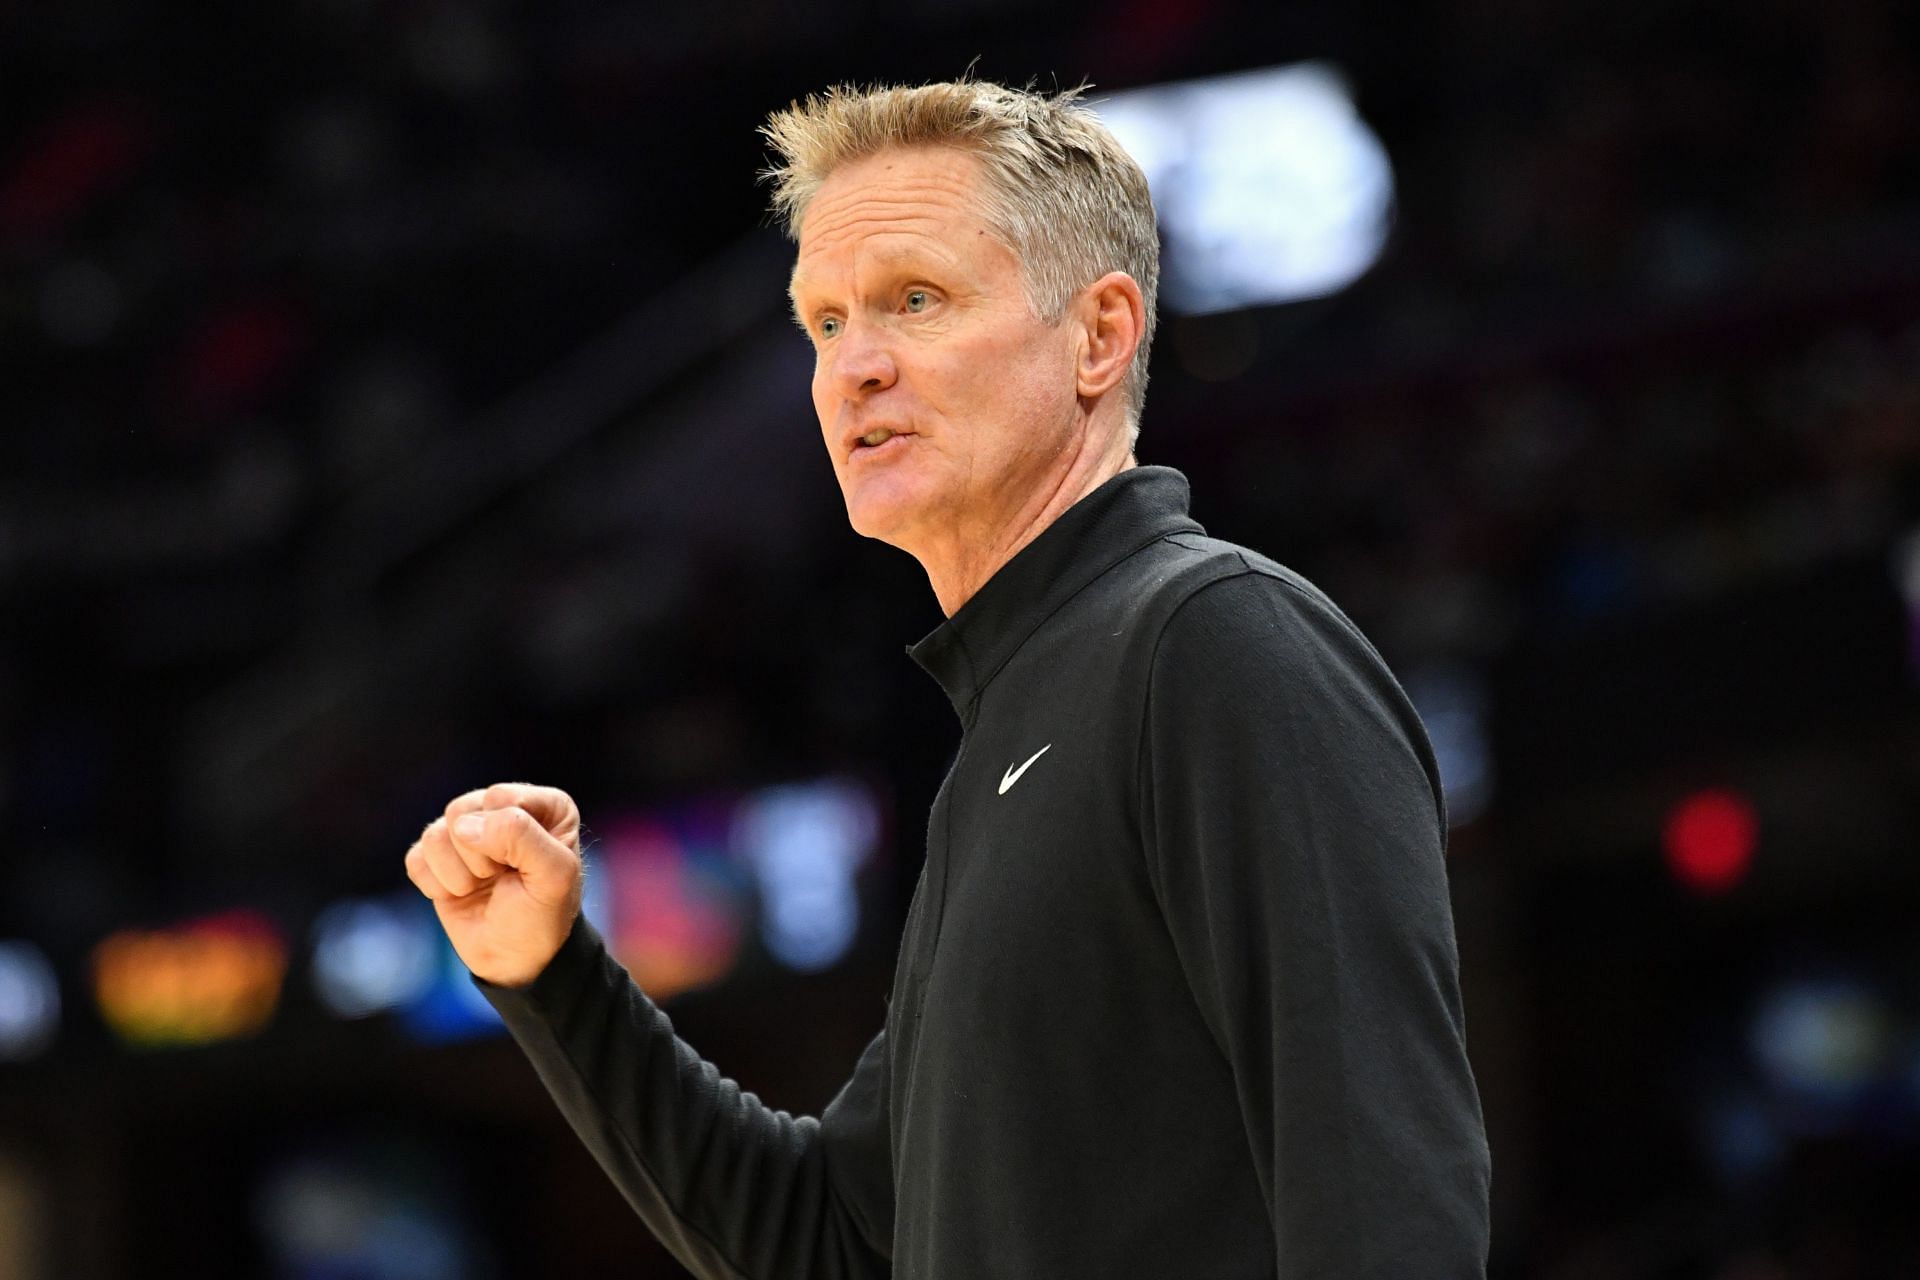 Head Coach Steve Kerr of the Golden State Warriors communicates with his players during the second half against the Cleveland Cavaliers at Rocket Mortgage Fieldhouse on November 18, 2021 in Cleveland, Ohio.